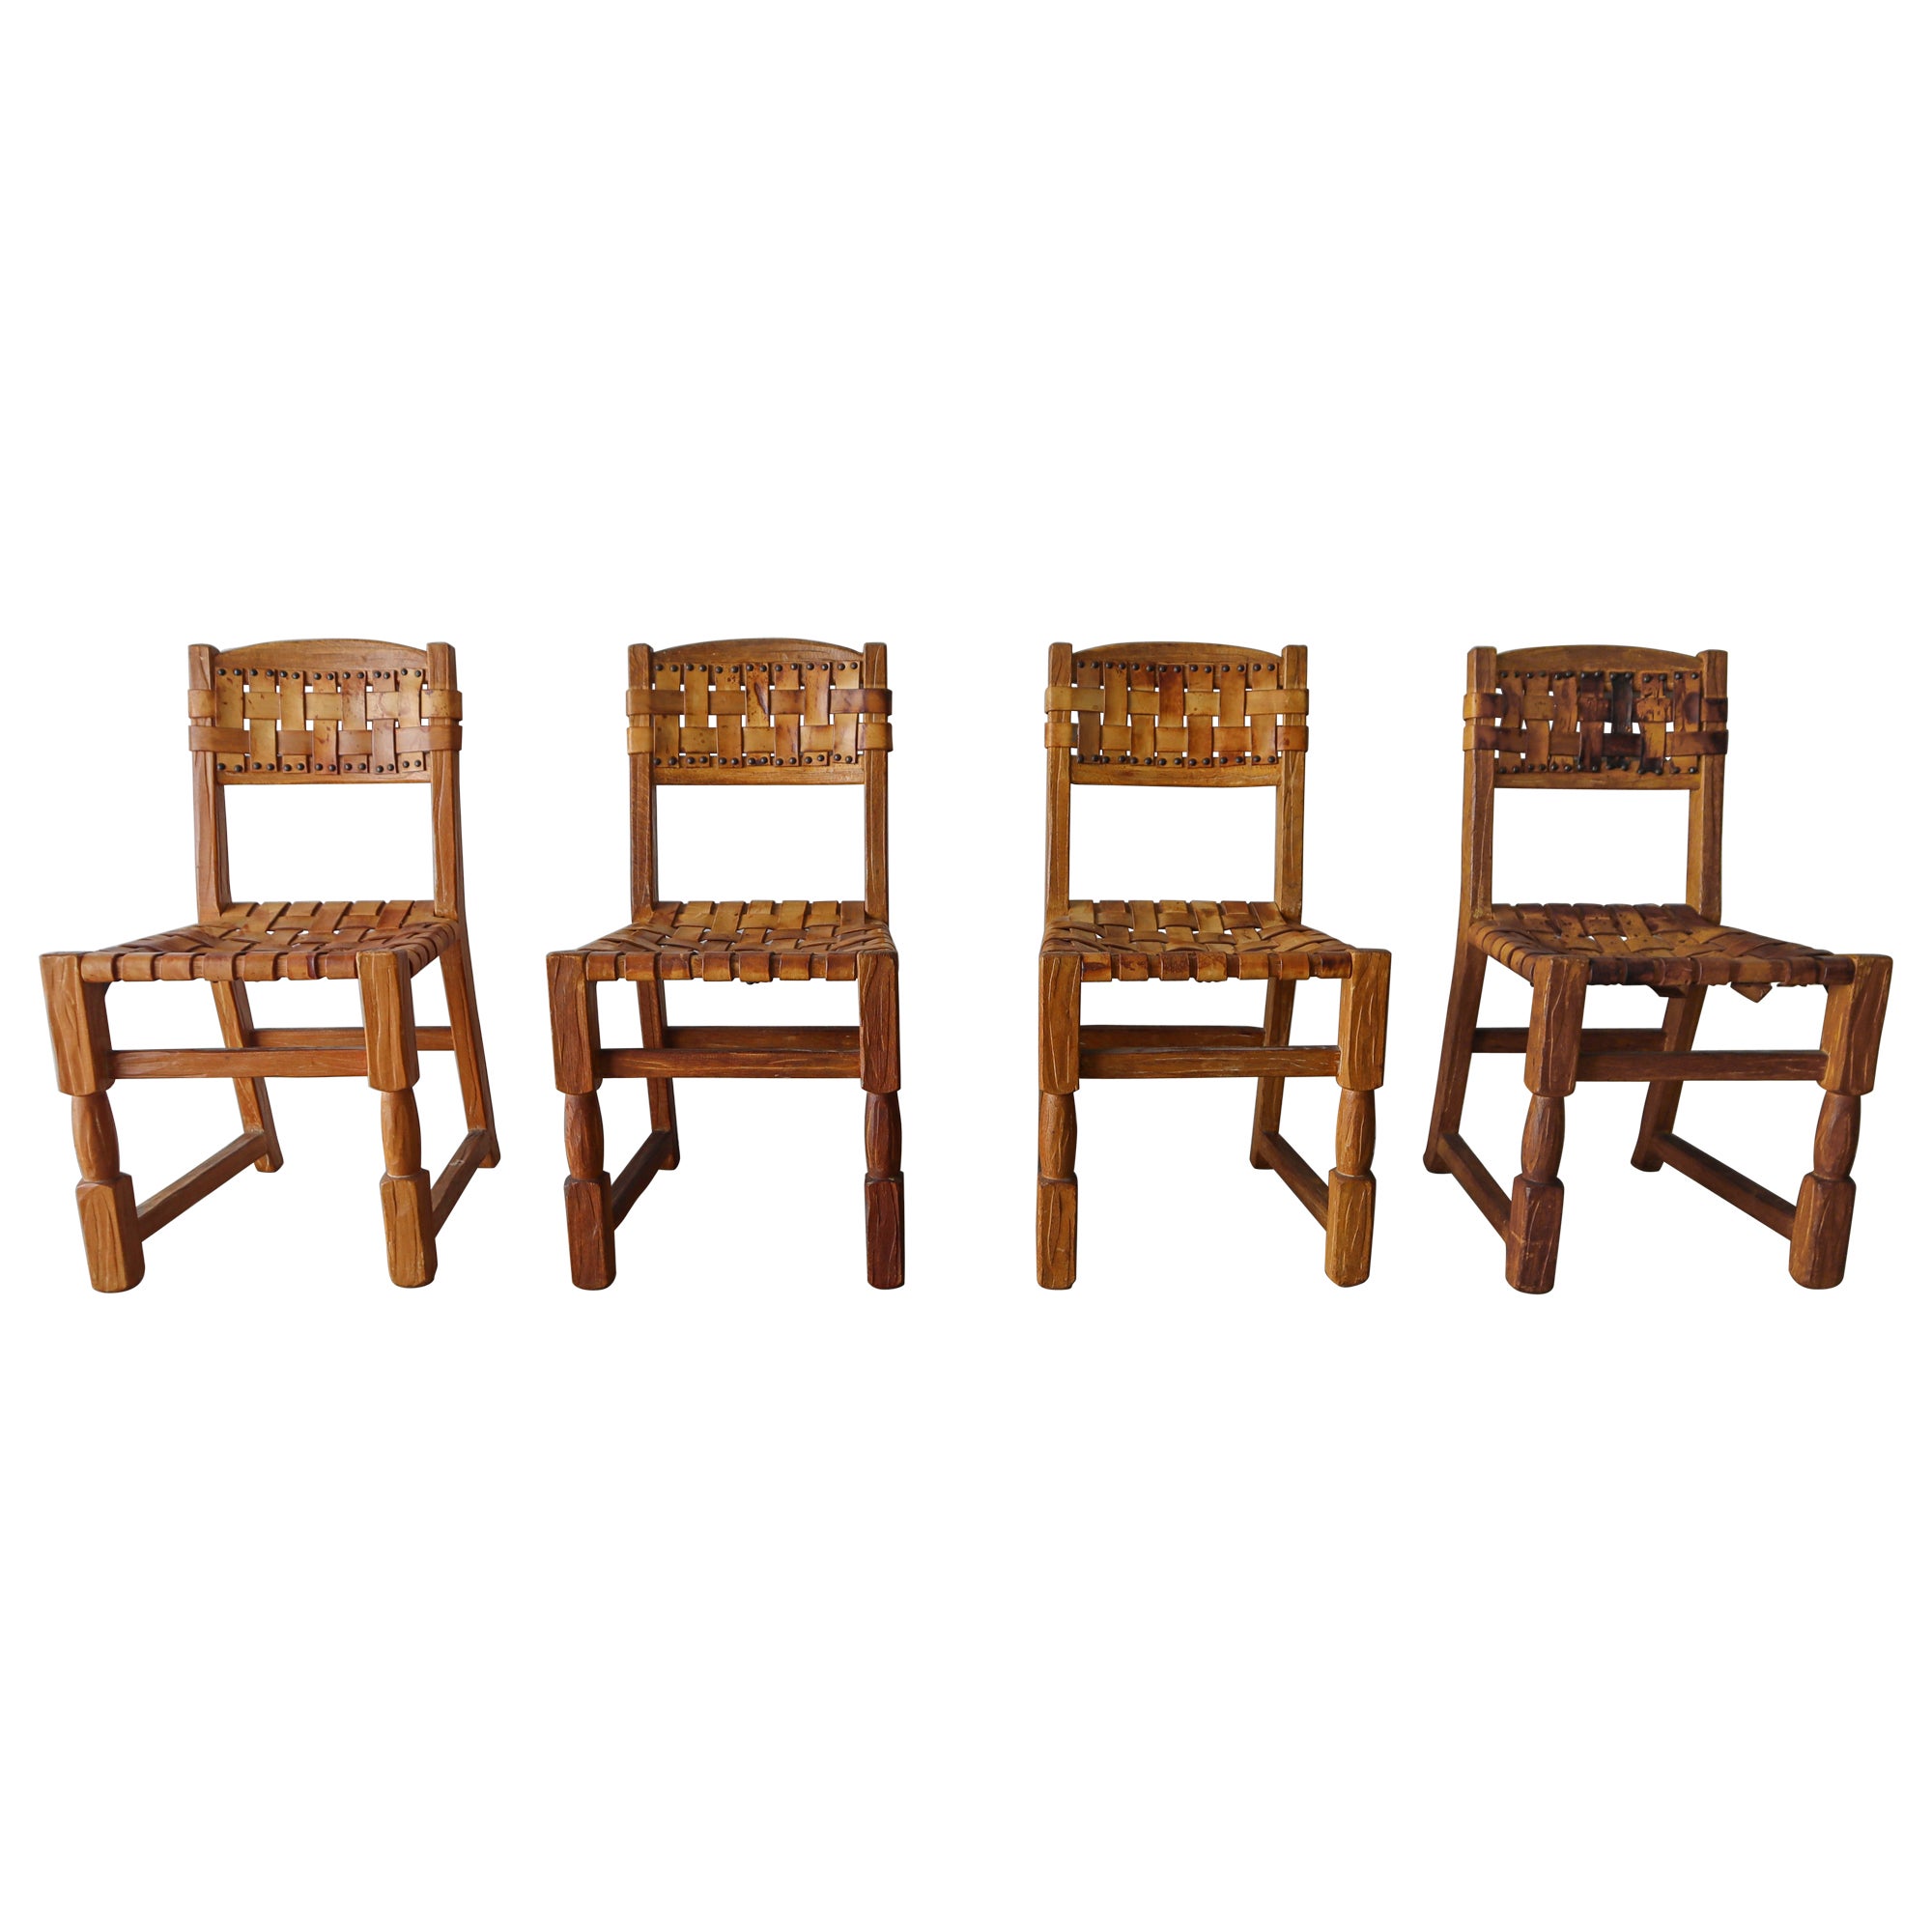 Set of Four Woven Leather Dining Chairs